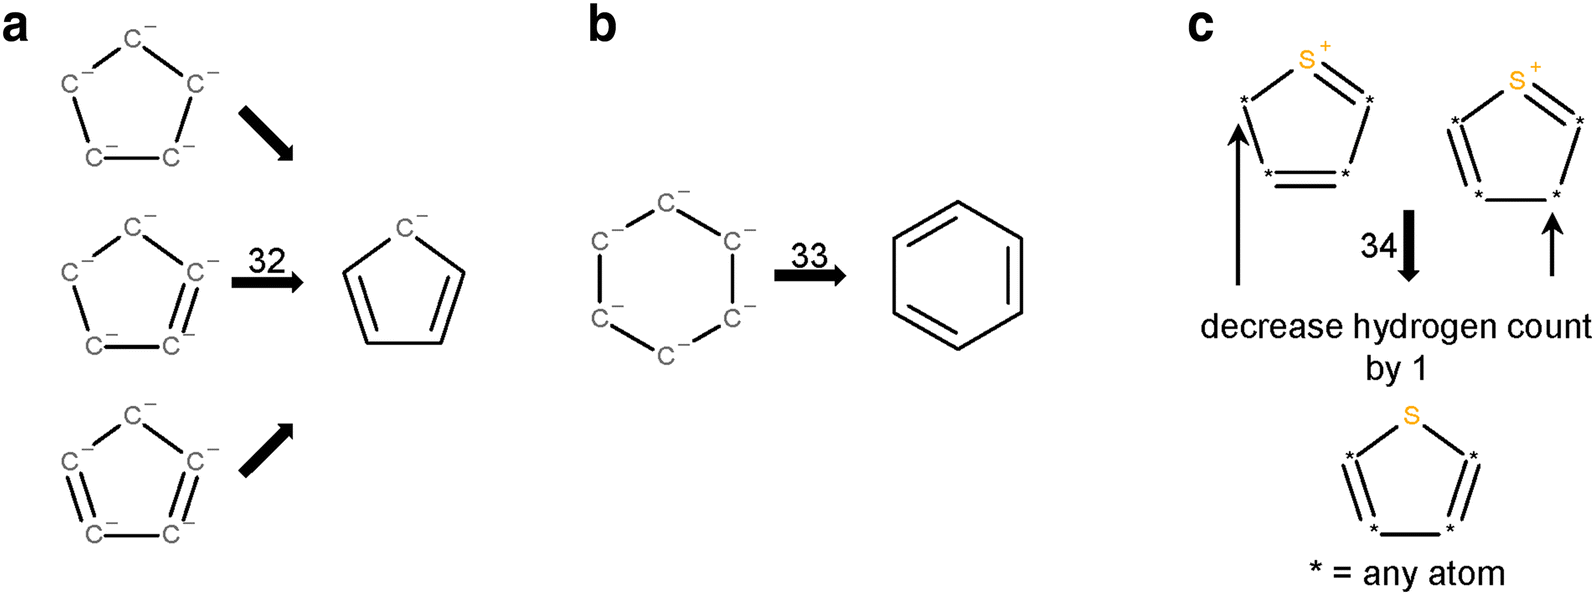 Fig. 33